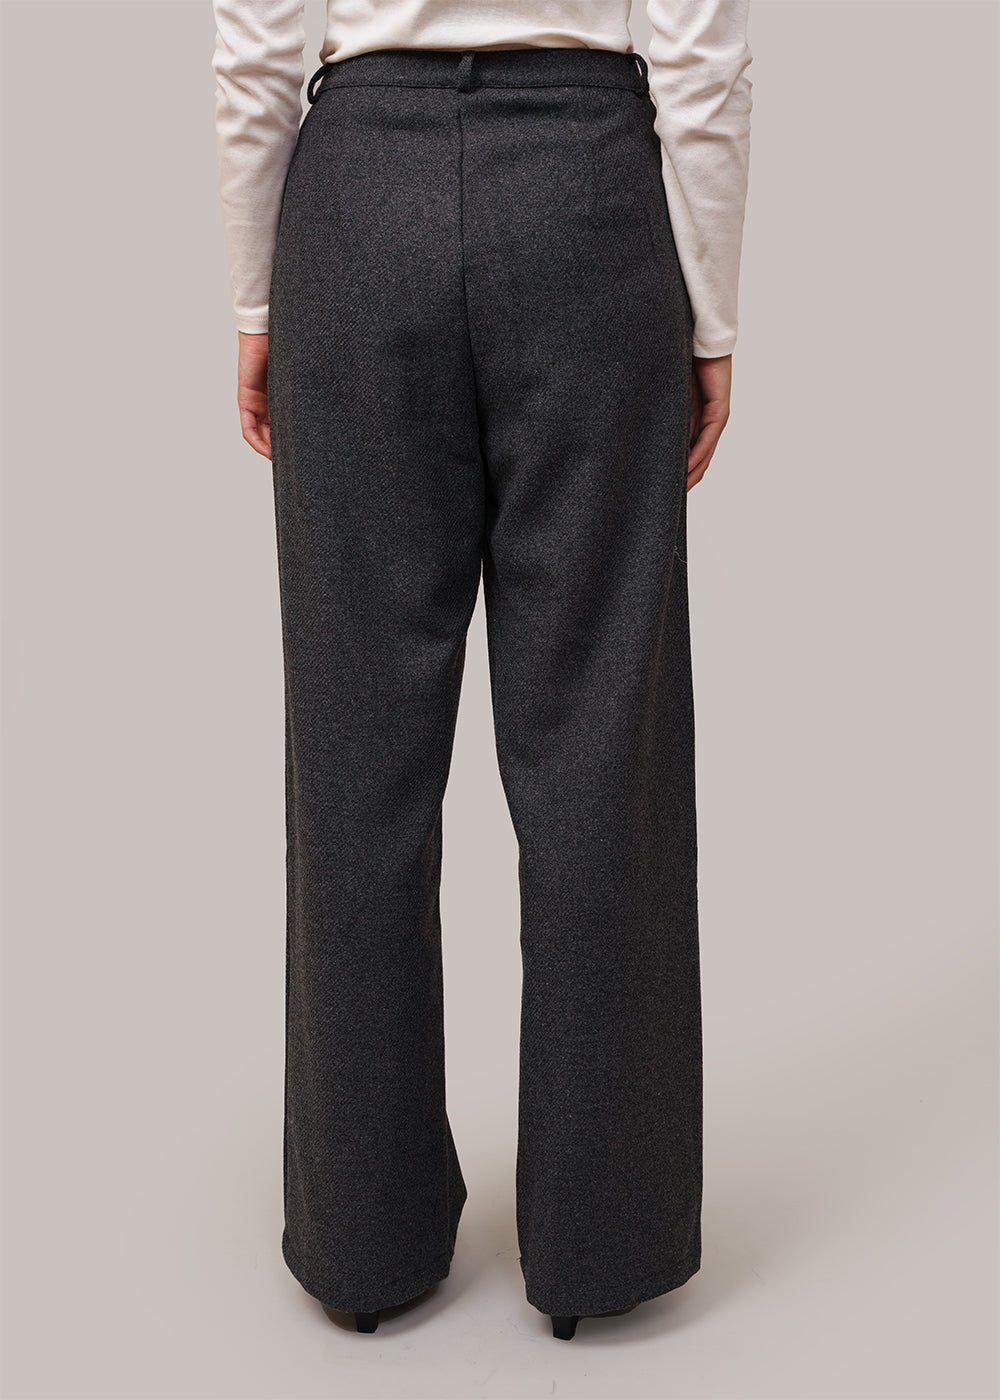 By Signe Grey Liv Flannel Pants - New Classics Studios Sustainable Ethical Fashion Canada